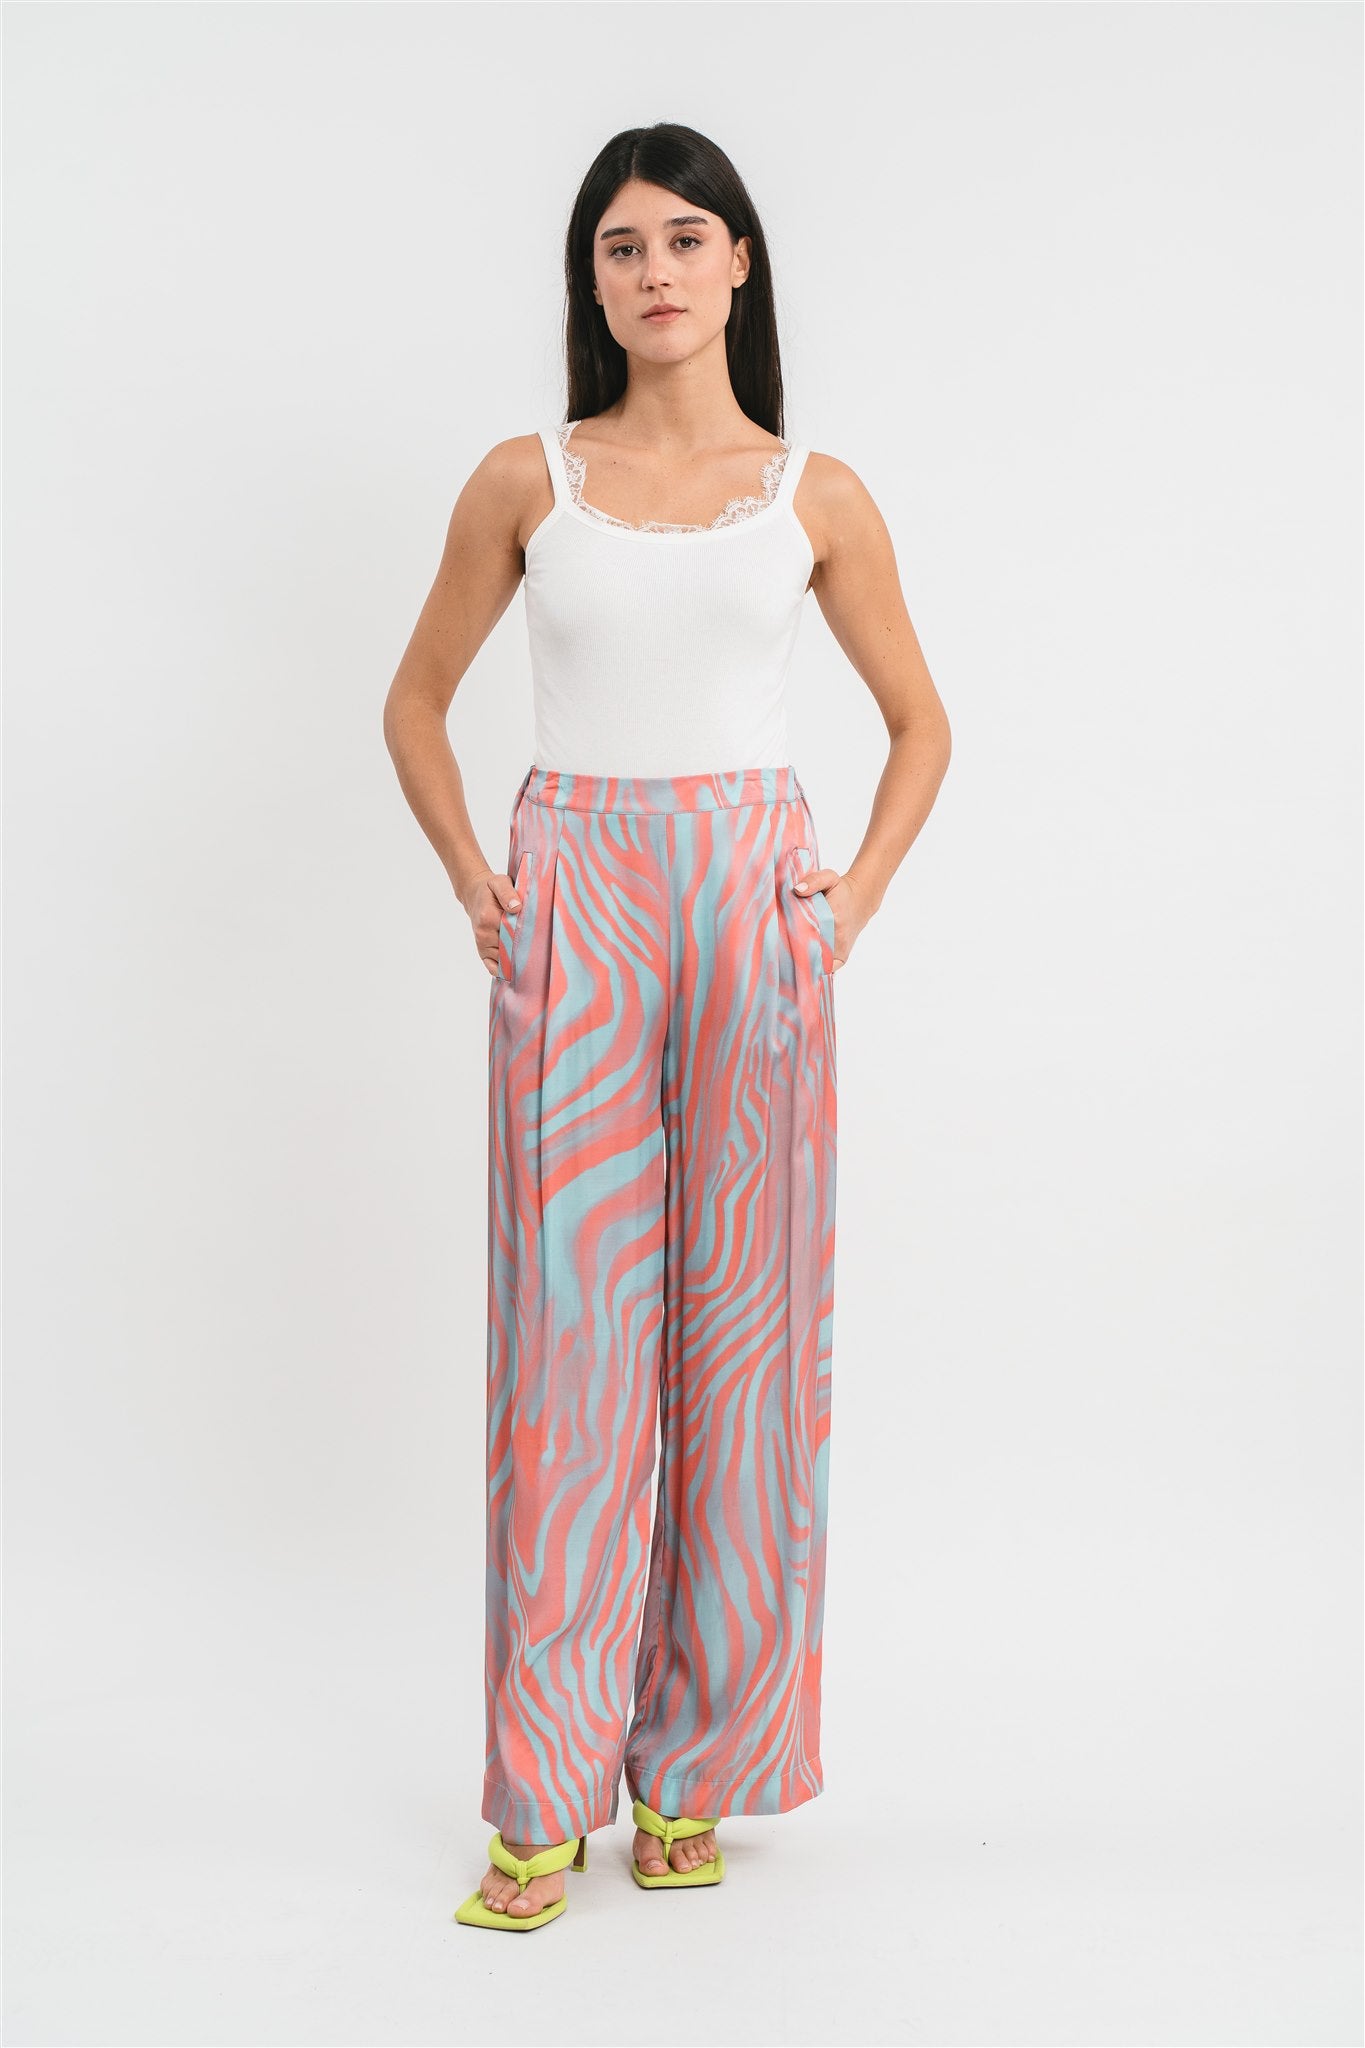 Palazzo trousers in optical print